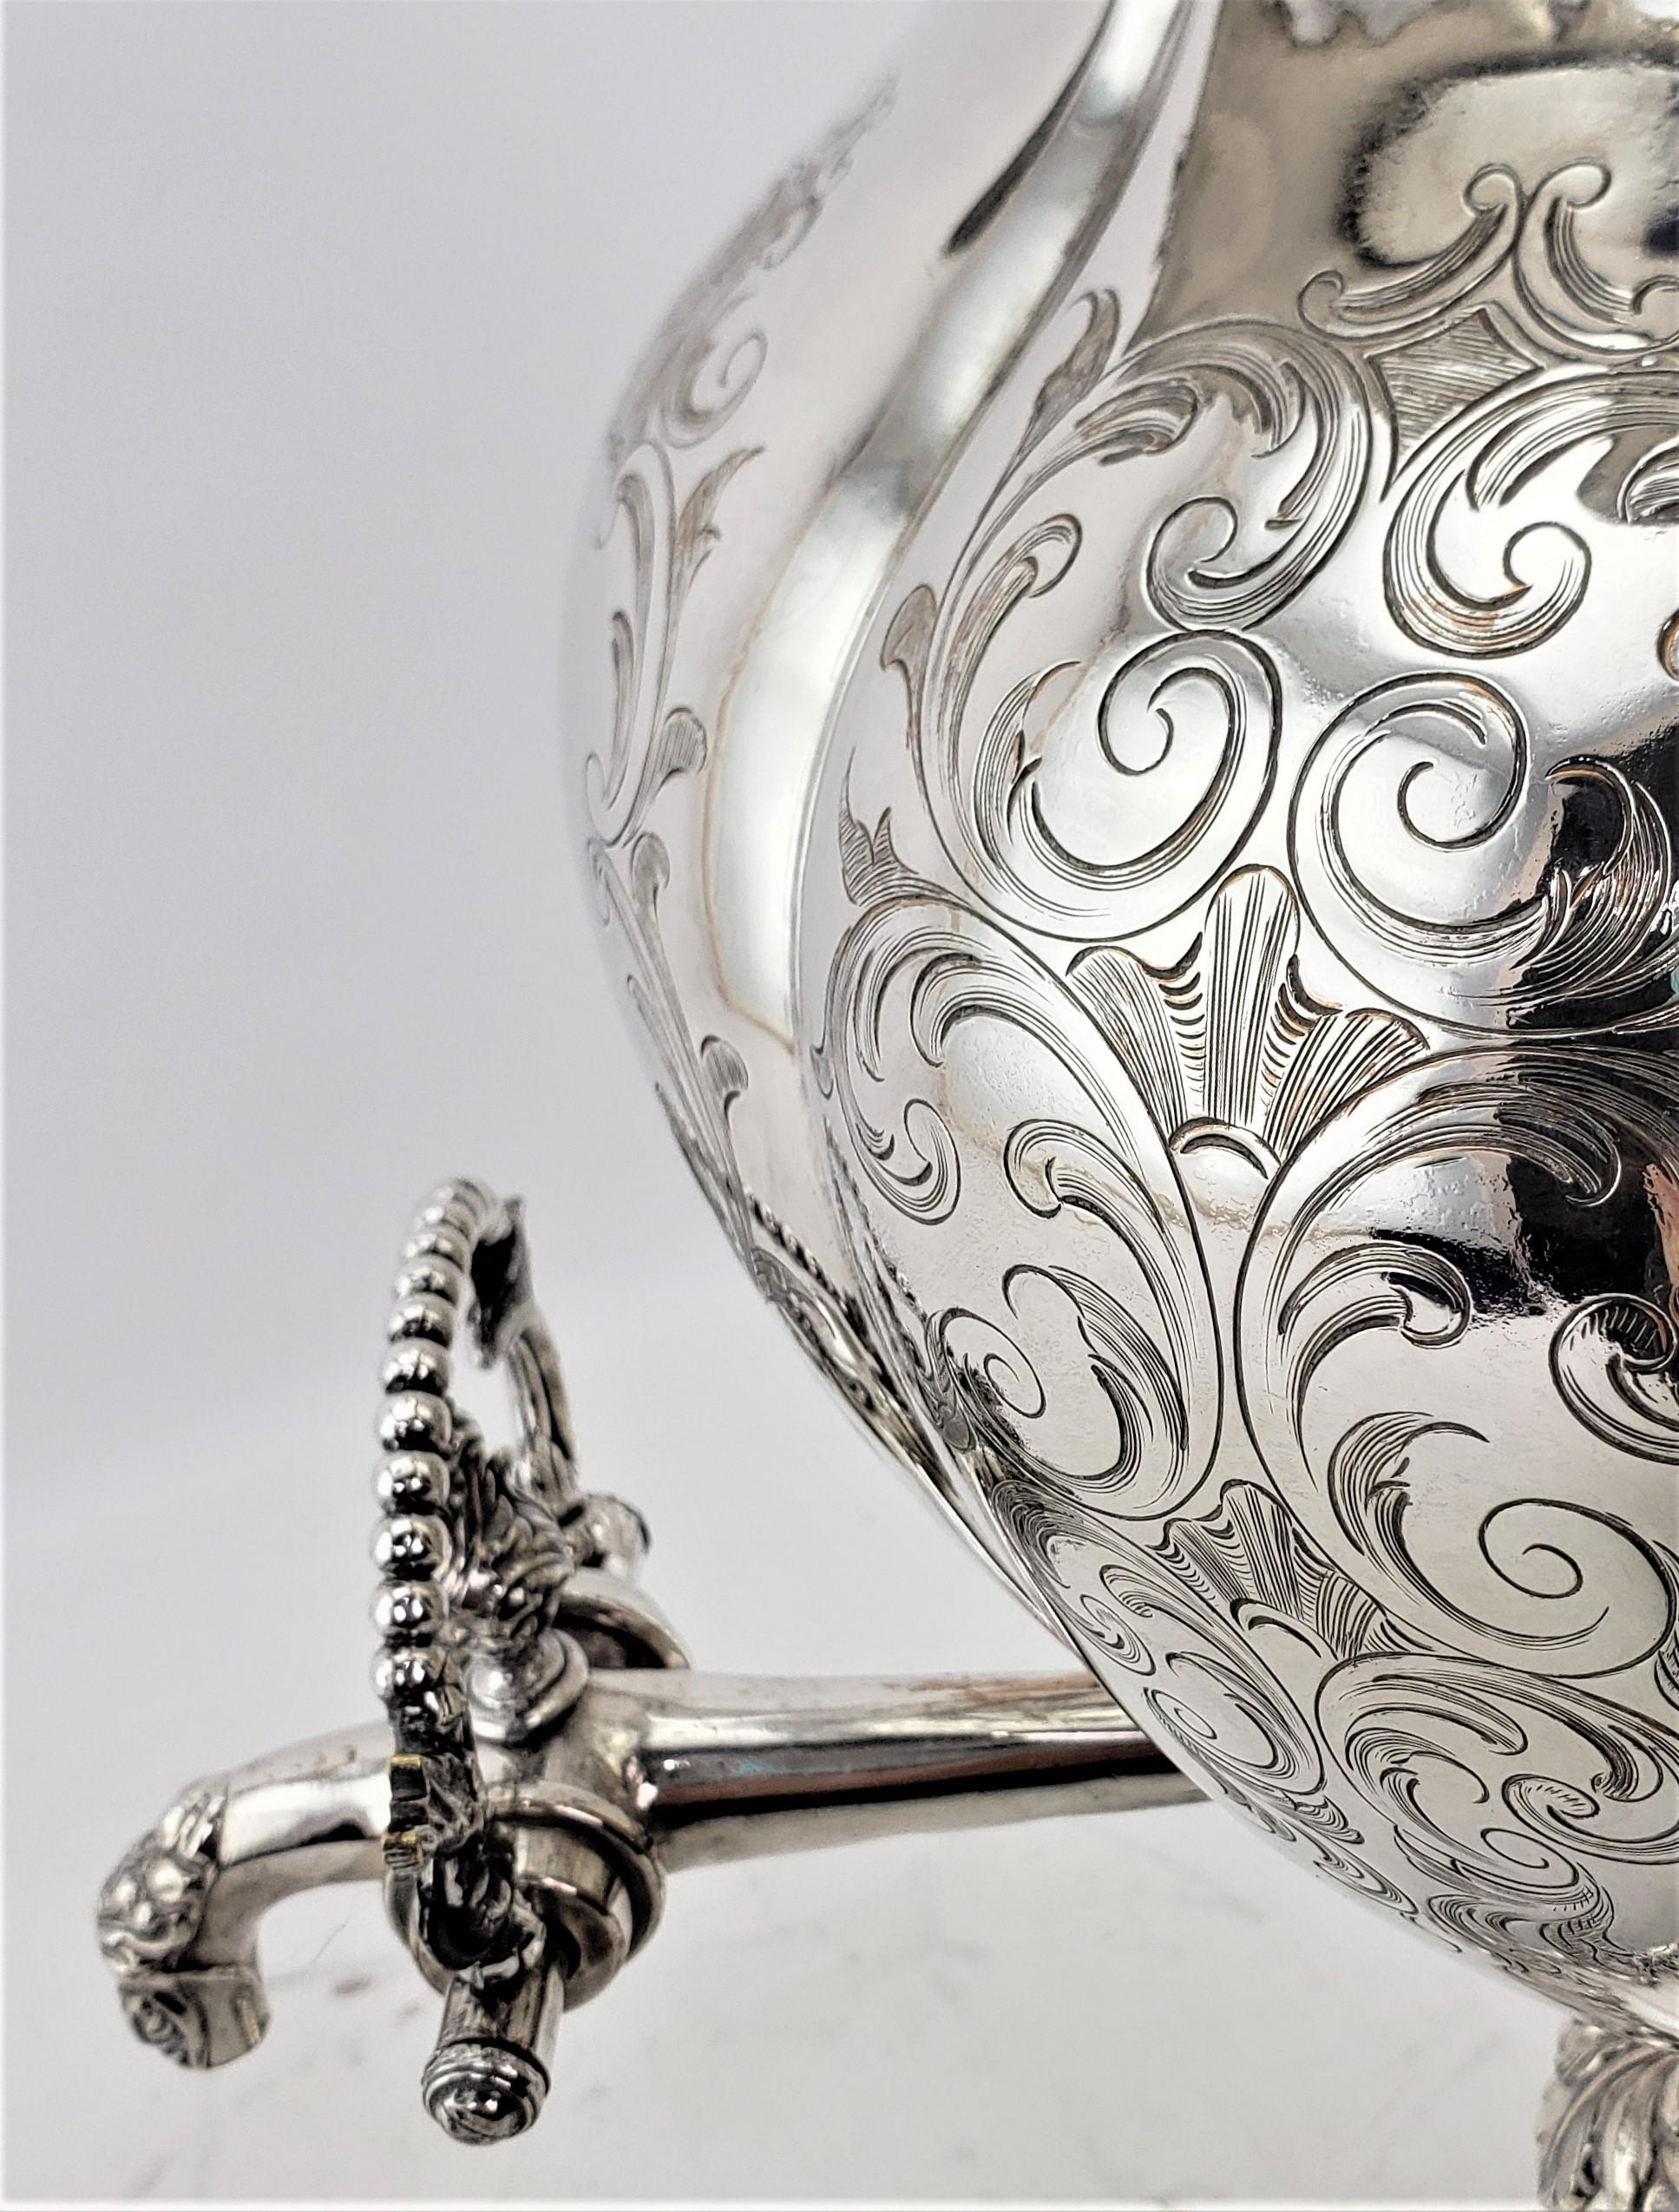 Antique Early Victorian Silver Plated Tea or Hot Water Urn with Floral Engraving For Sale 6